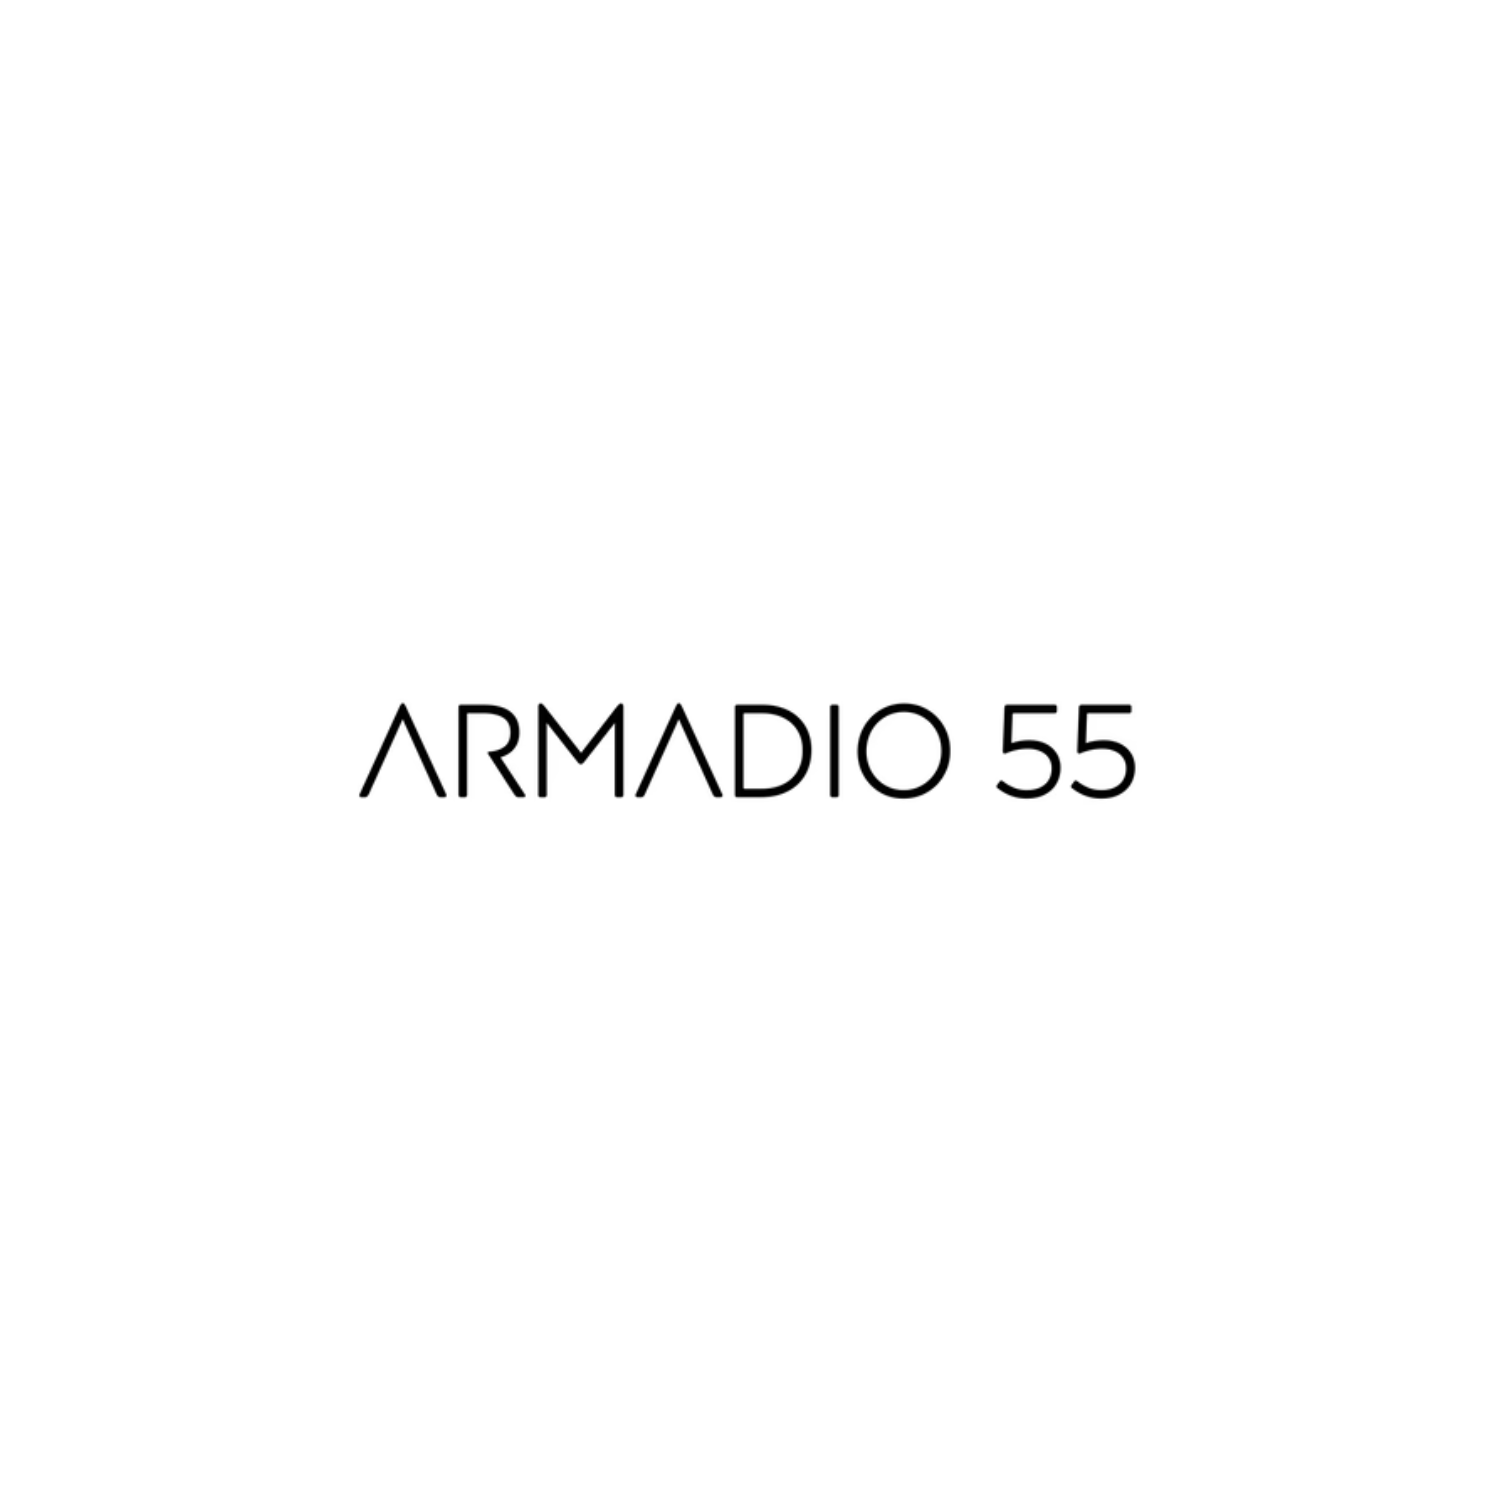 Read more about the article ARMADIO 55